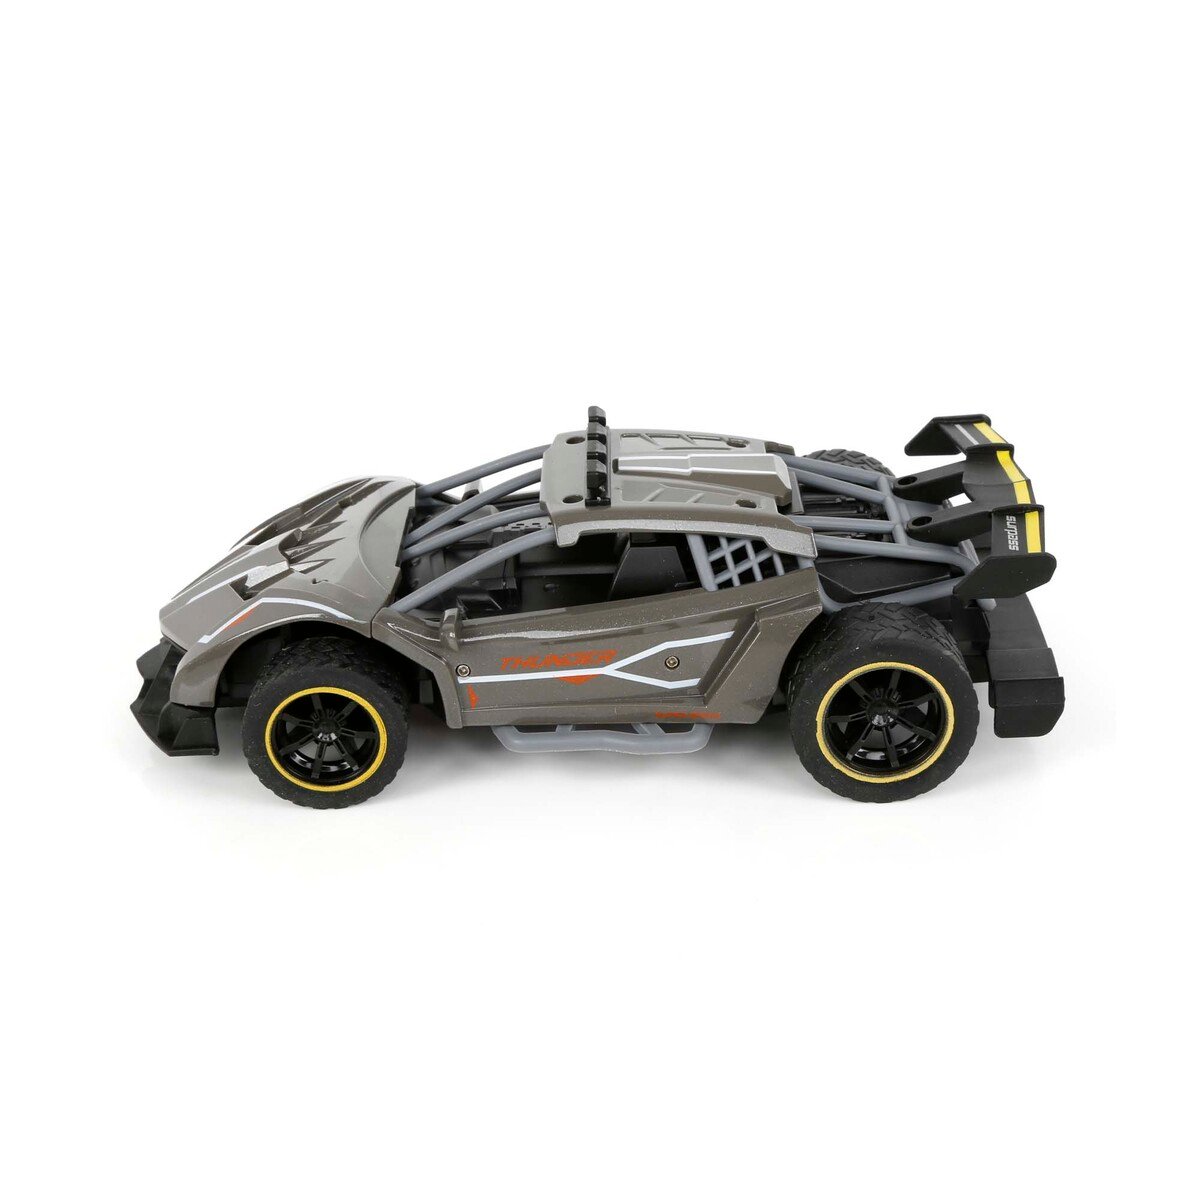 Skid Fusion High Speed Remote Controlled Car 5618-4